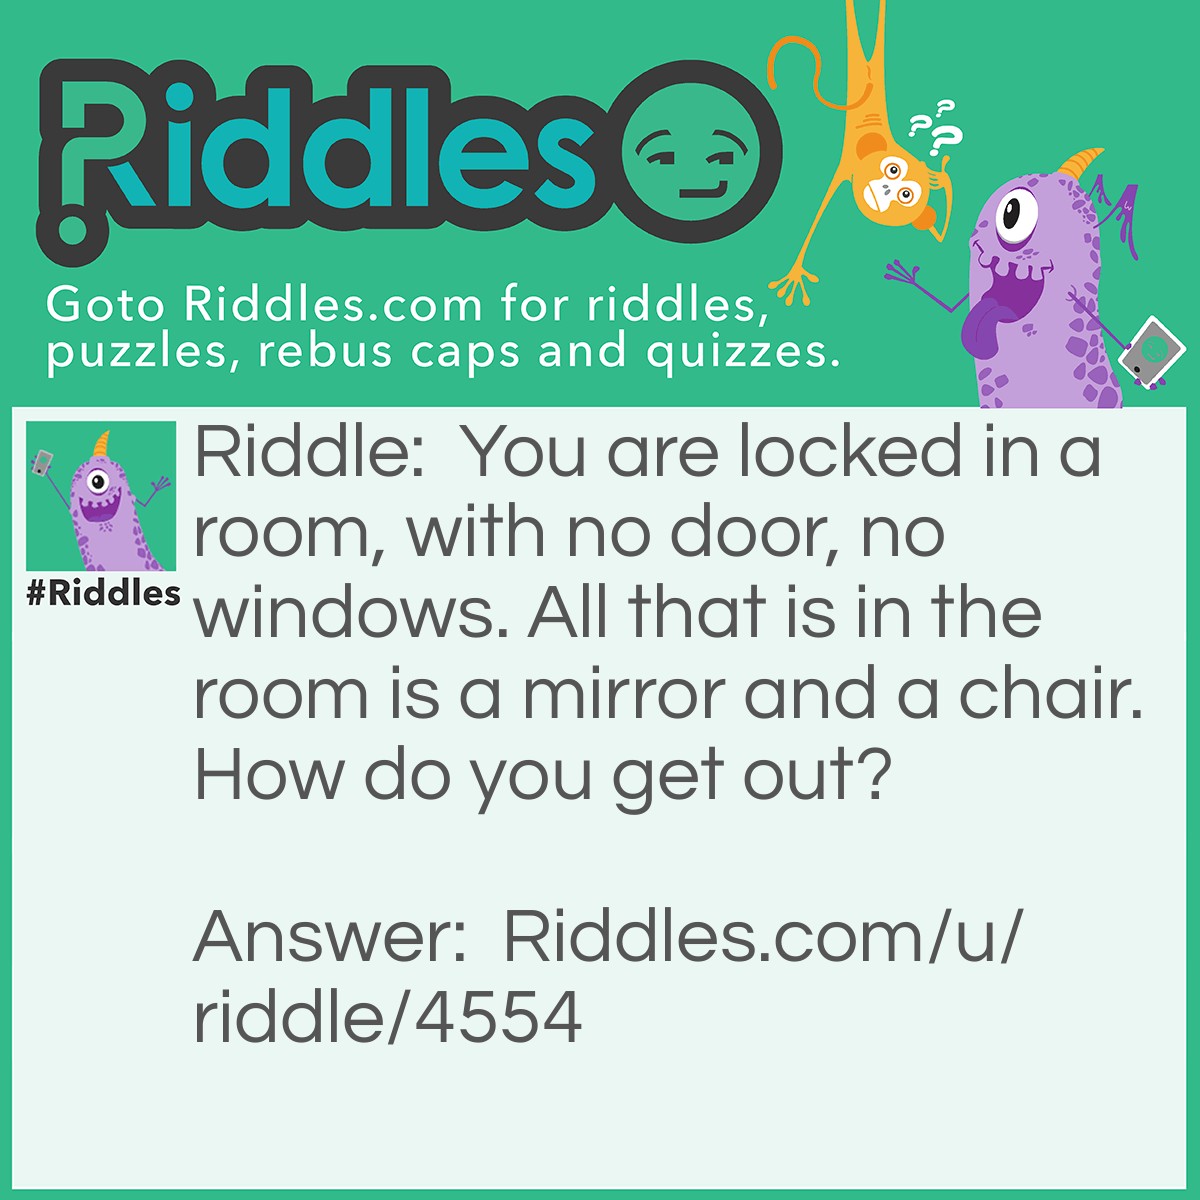 Riddle: You are locked in a room, with no door, no windows. All that is in the room is a mirror and a chair. How do you get out? Answer: Look in the mirror see what you saw, take the saw, cut the chair in half, put them together to make a hole, crawl out through the hole.